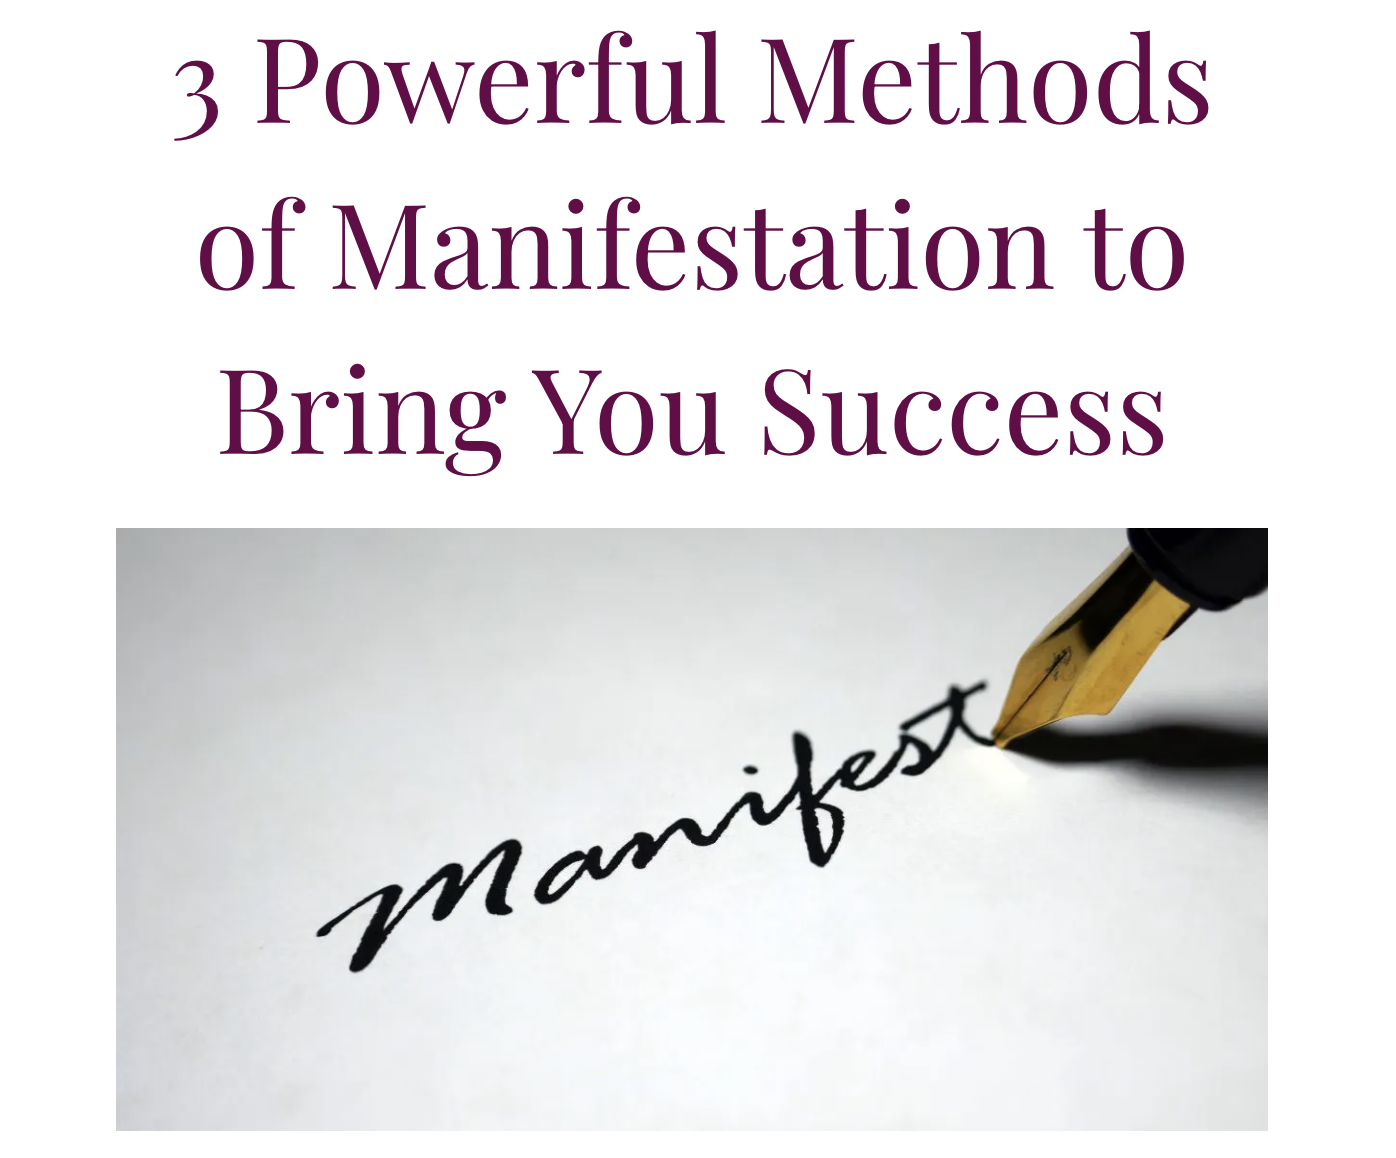 *3 Powerful Methods of Manifestation to Bring You Success